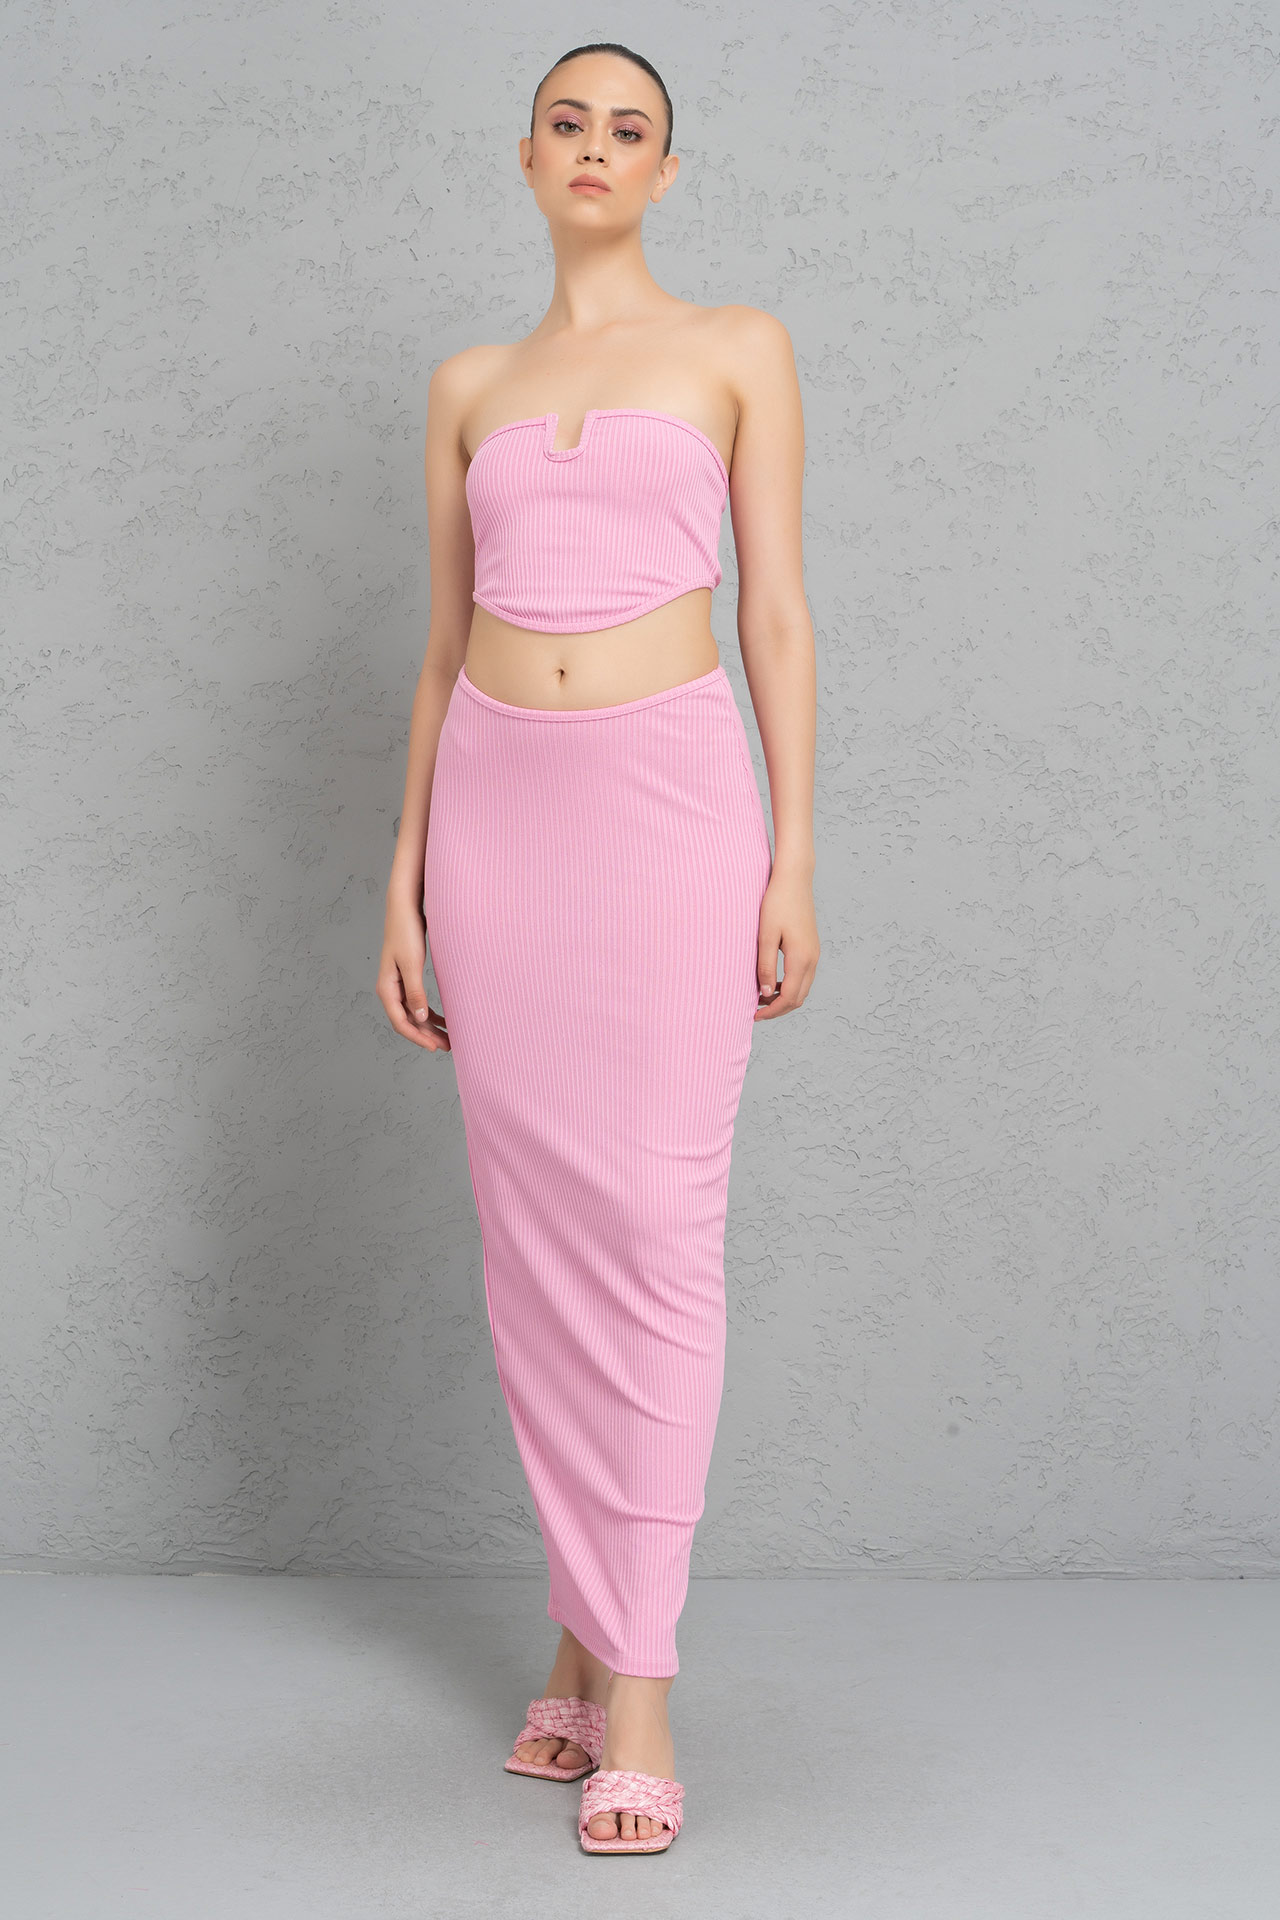 New Pink U-Wire Tube Top & Skirt Set